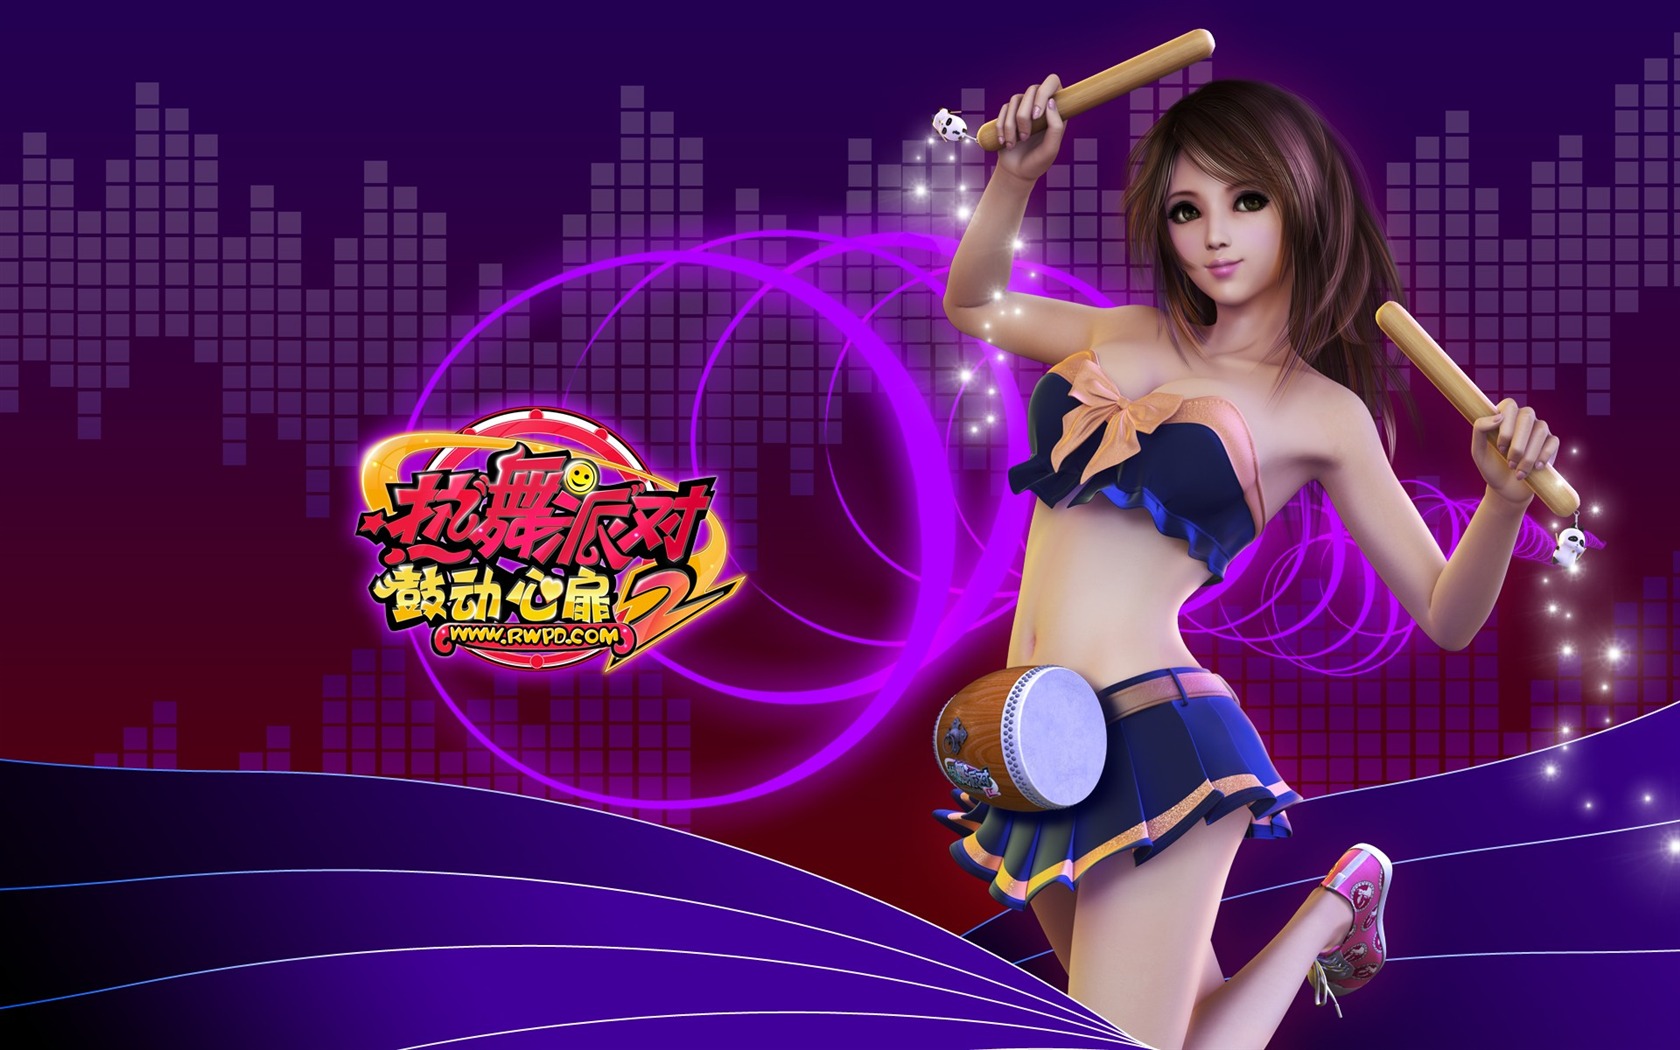 Online game Hot Dance Party II official wallpapers #17 - 1680x1050